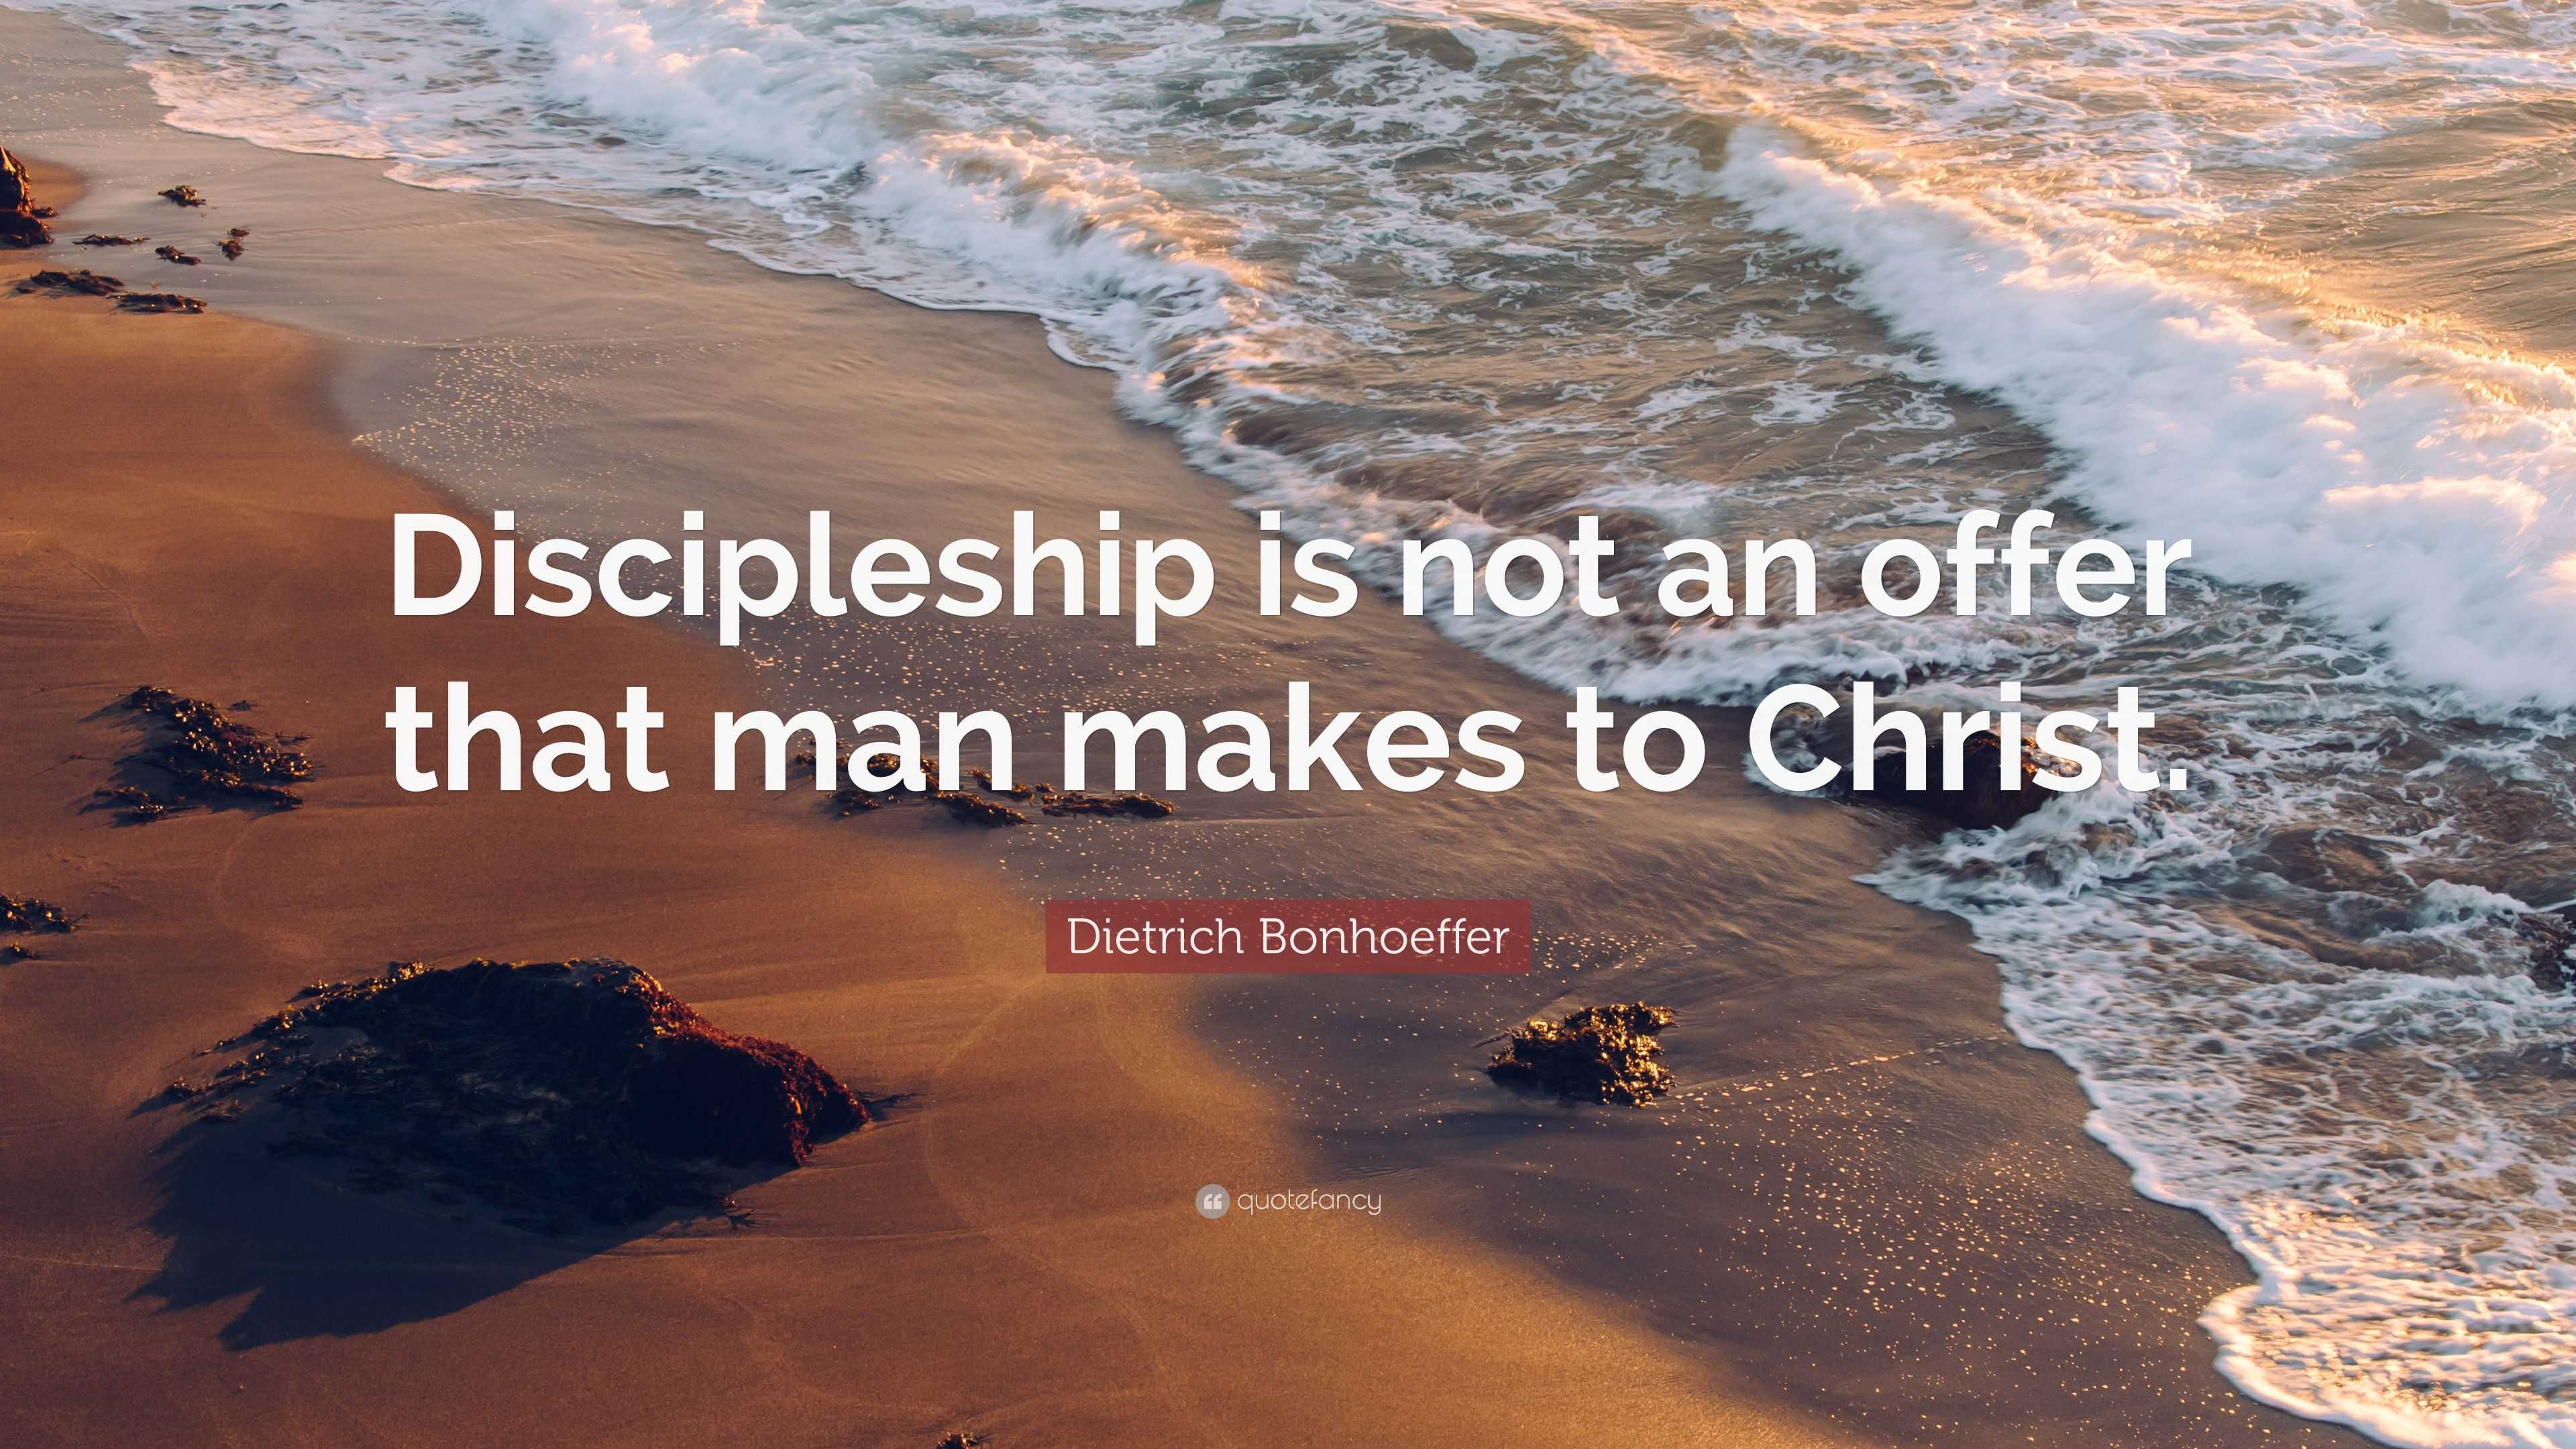 Dietrich Bonhoeffer Quote “Discipleship is not an offer that man makes